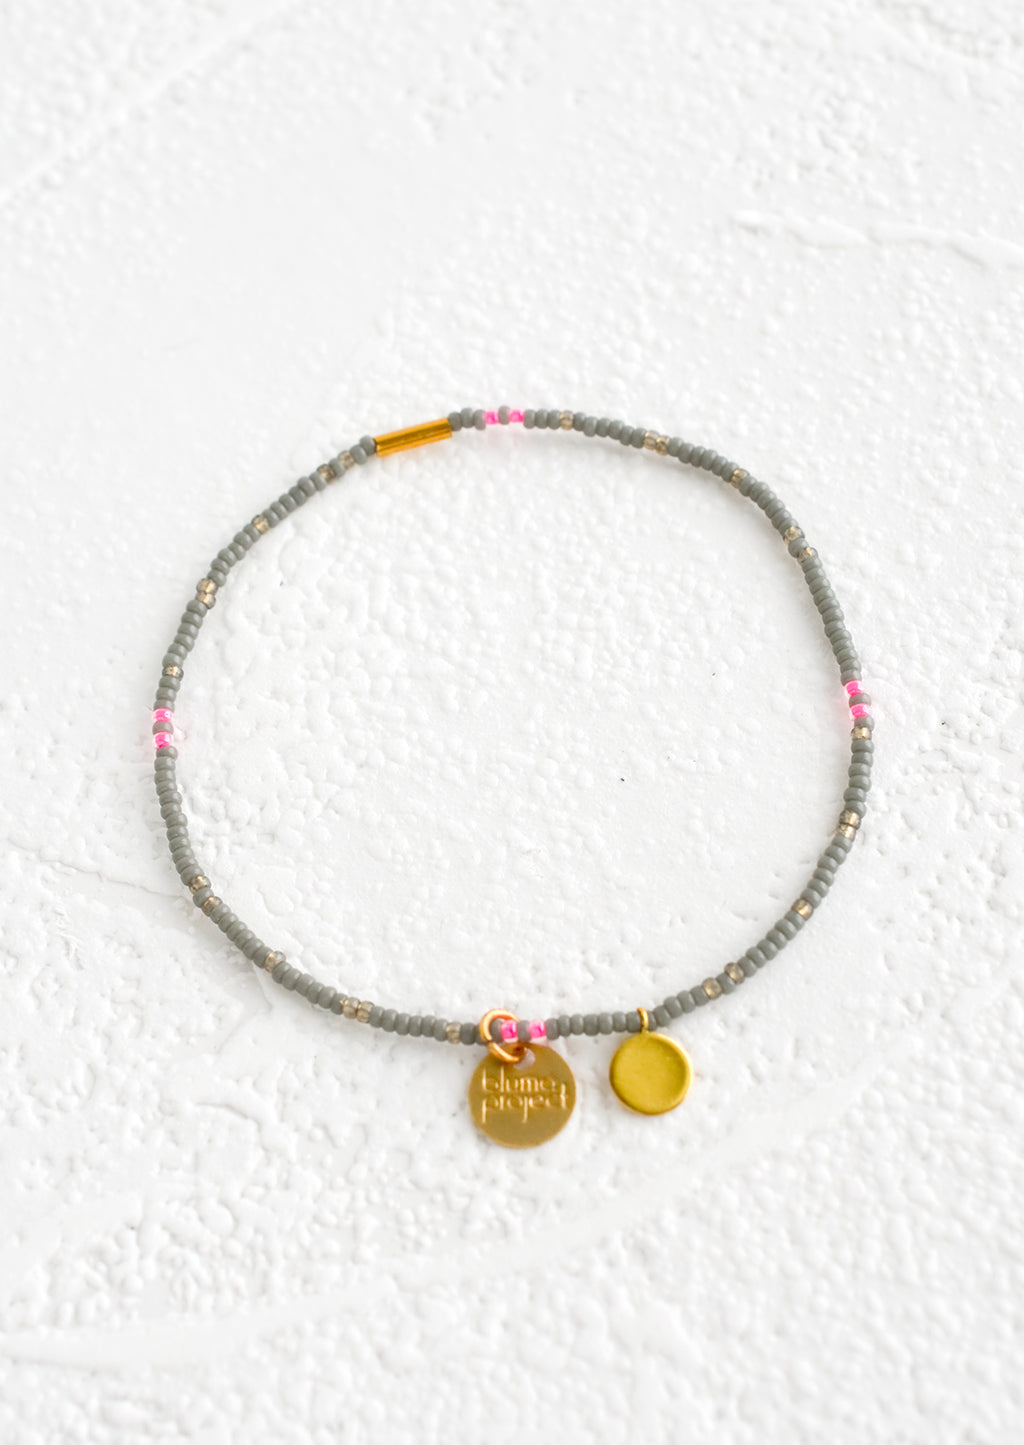 Grey / Neon Pink: Seed bead bracelet in grey and neon pink with brass accents